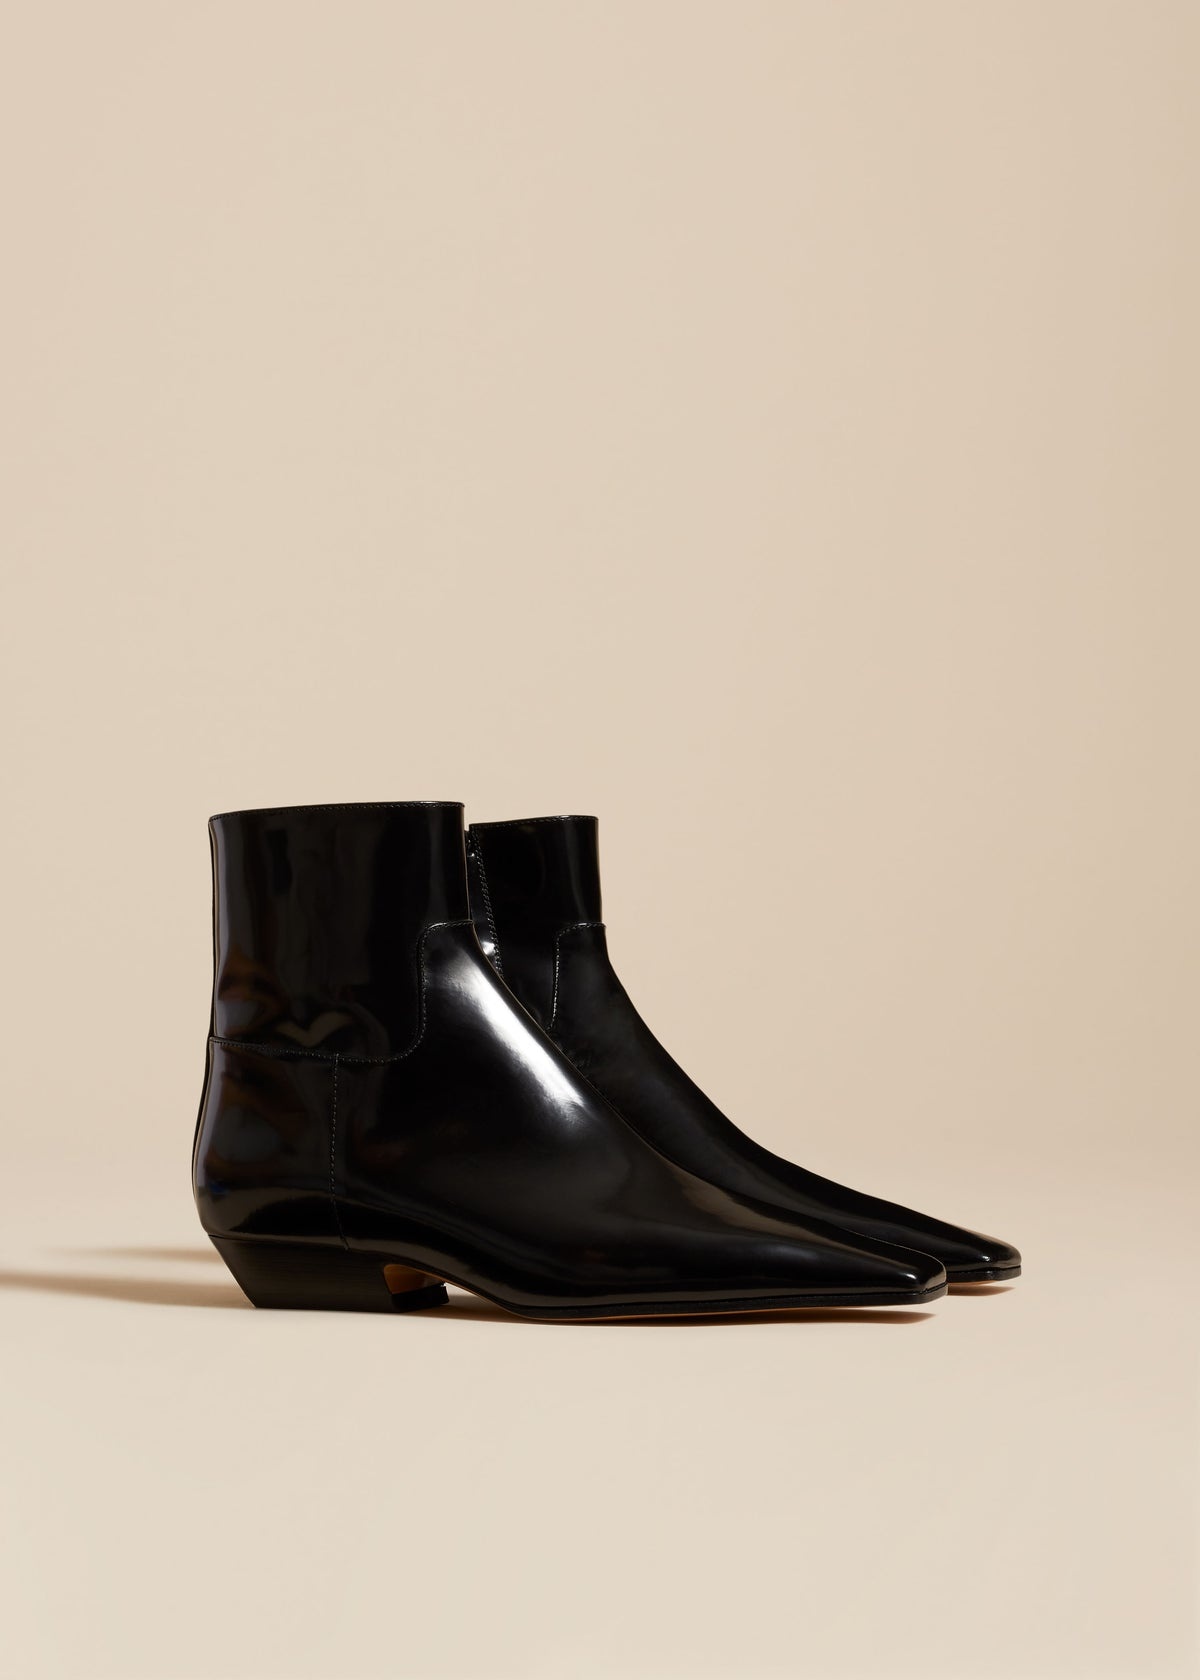 The Marfa Ankle Boot in Black Brushed Leather - 2